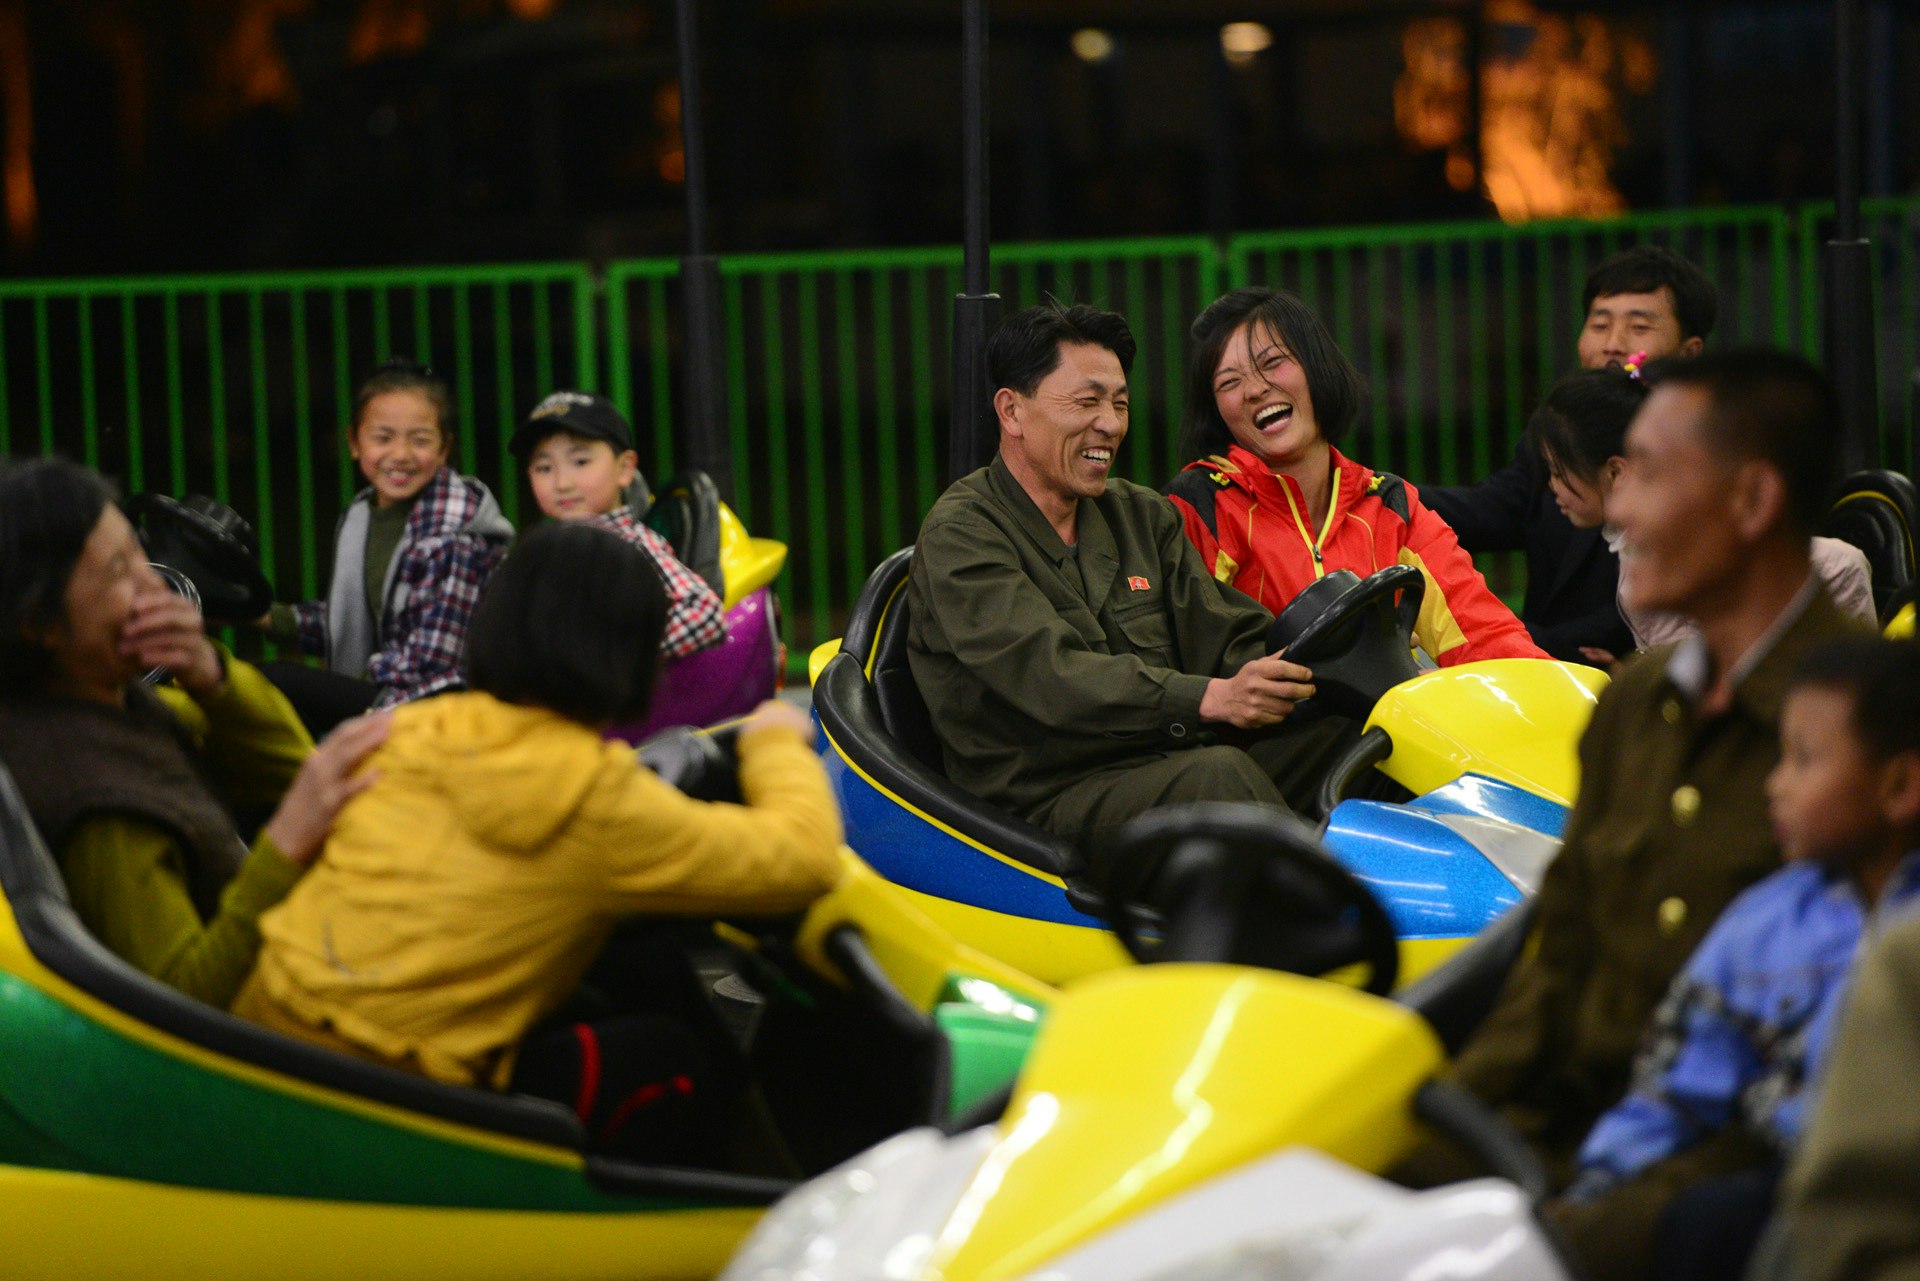 Two people share a laugh at the Pyongyang Amusement park, which featured bumper cars, a roller coaster and other rides. 